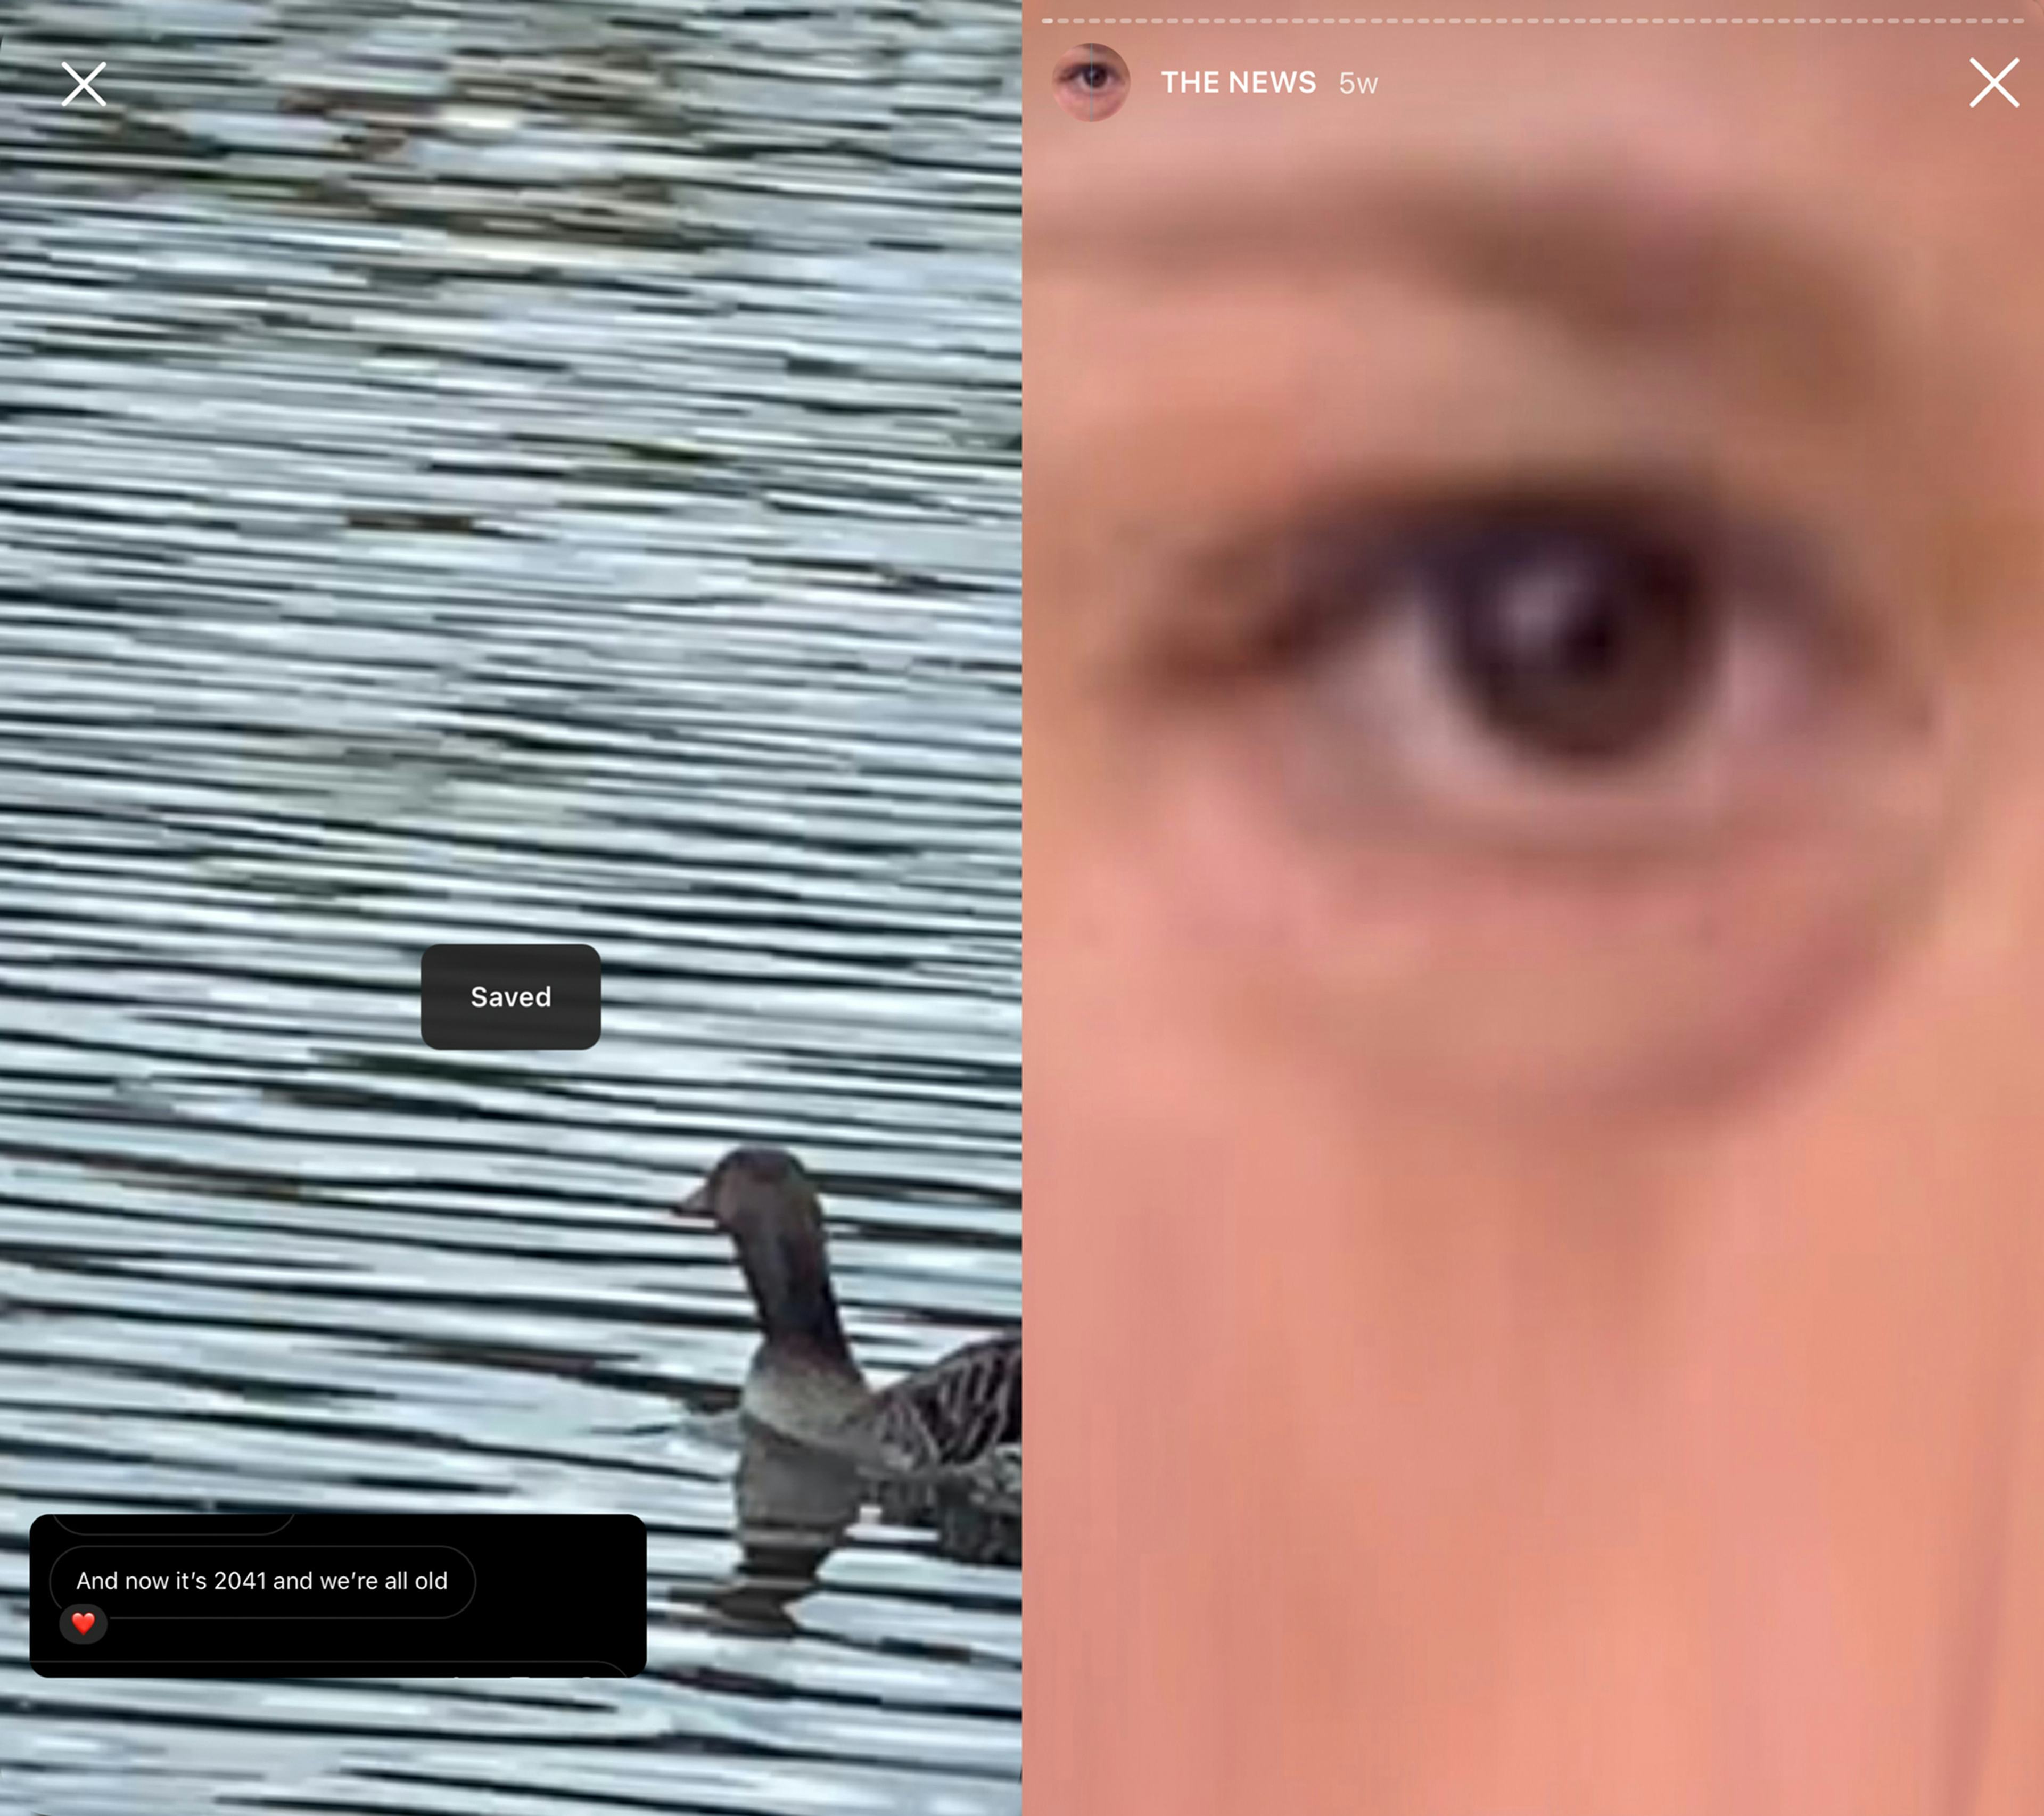 Screenshot from Instagram with a duck in the water and a zoomed-in image of an eye